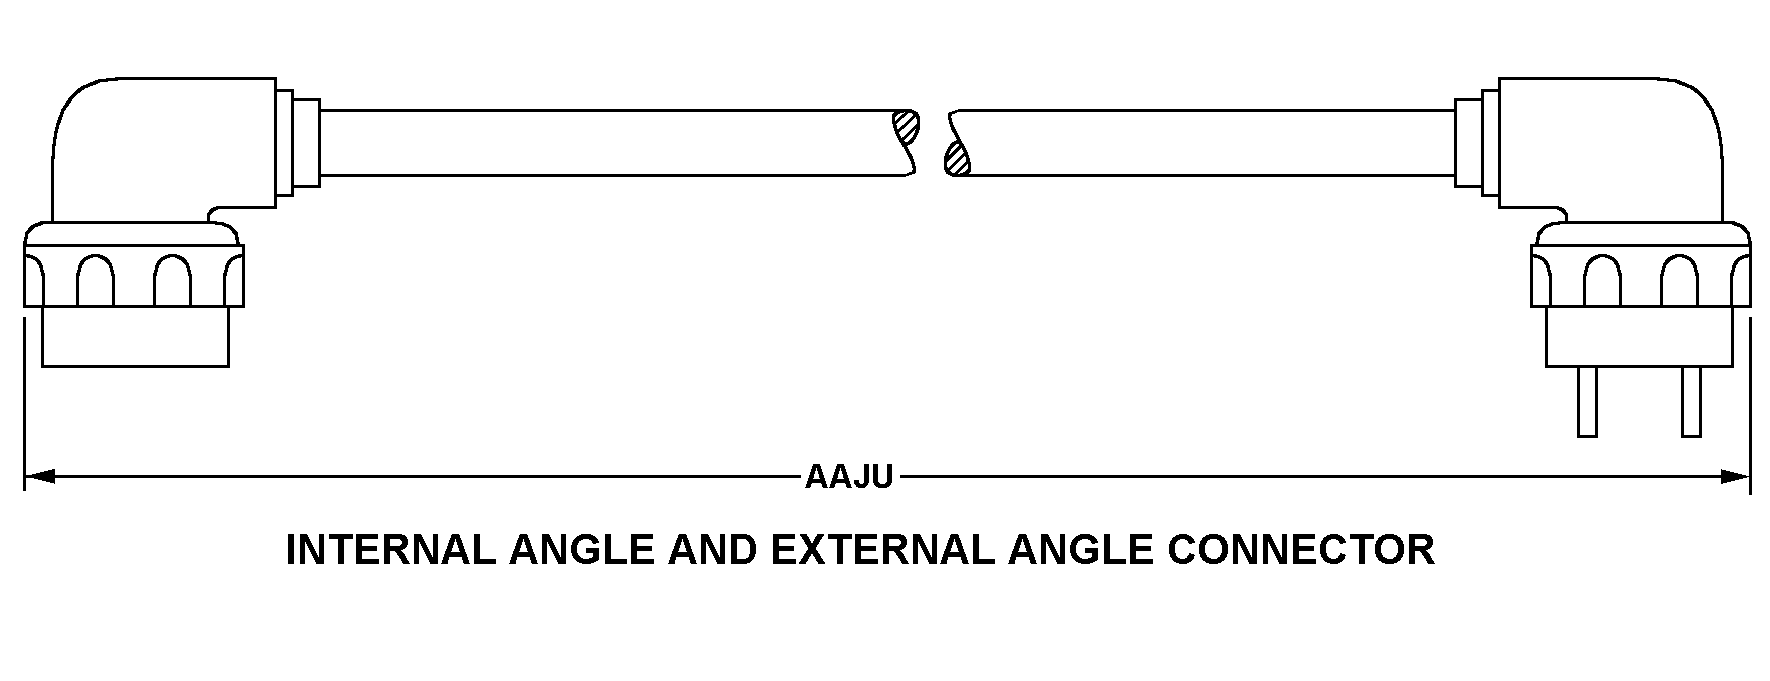 INTERNAL ANGLE AND EXTERNAL ANGLE CONNECTOR style nsn 5995-01-374-4640